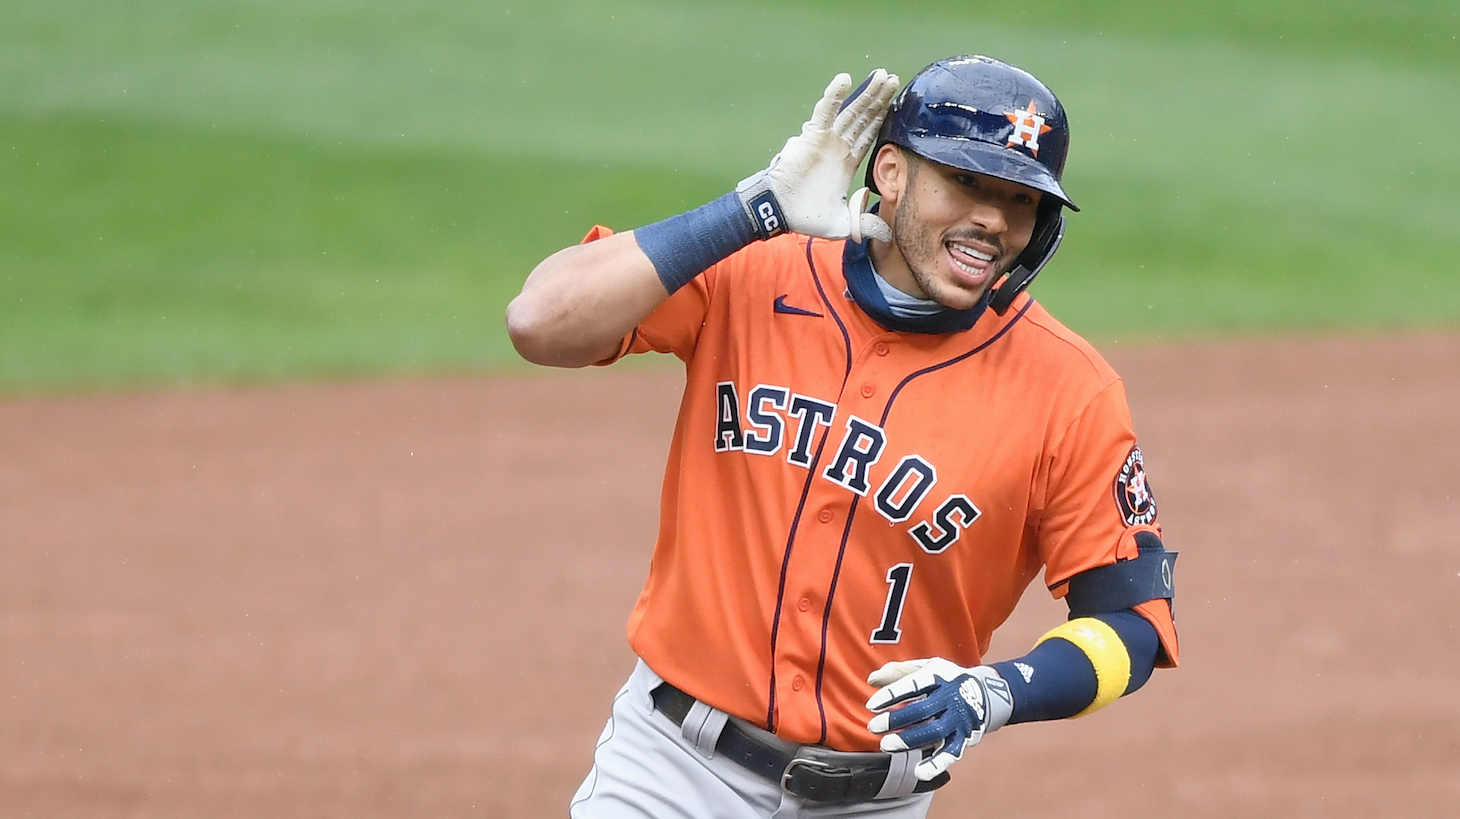 MINNEAPOLIS, MINNESOTA - SEPTEMBER 30: Carlos Correa #1 of the Houston Astros celebrates a solo home run against the Minnesota Twins during the seventh inning of Game Two in the American League Wild Card Round at Target Field on September 30, 2020 in Minneapolis, Minnesota. The Astros defeated the Twins 3-1. (Photo by Hannah Foslien/Getty Images)